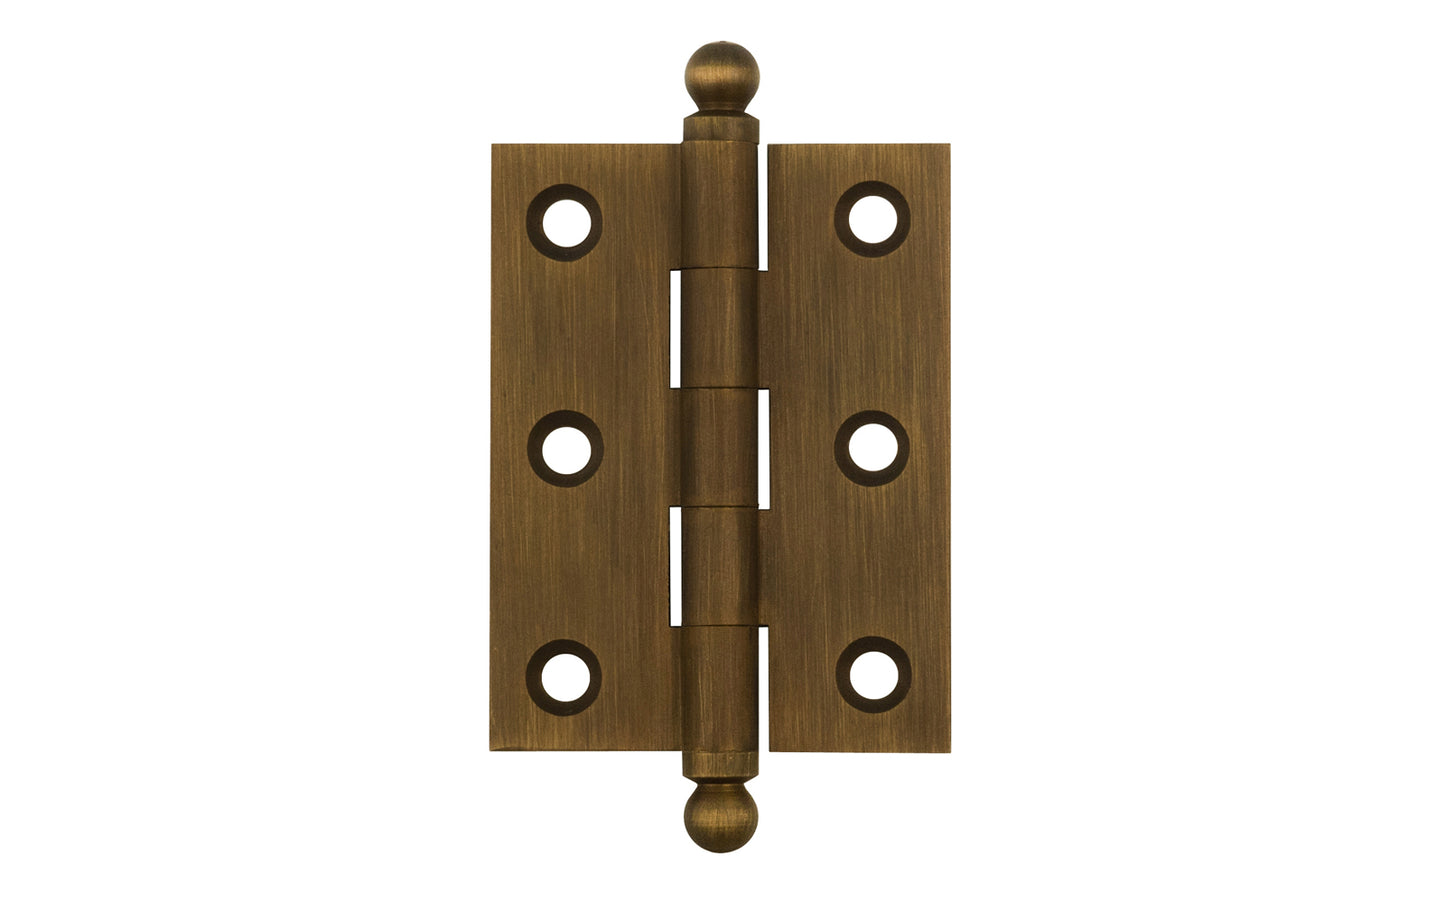 Classic Solid Brass Ball-Tip Cabinet Hinge ~ 2" x 1-1/2". Full mortise extruded hinges. 3/32" heavy duty leaf thickness gauge. Non-removable fixed hinge pin with ball tips. High quality thick cabinet hinge with ball tips. Antique Brass finish.